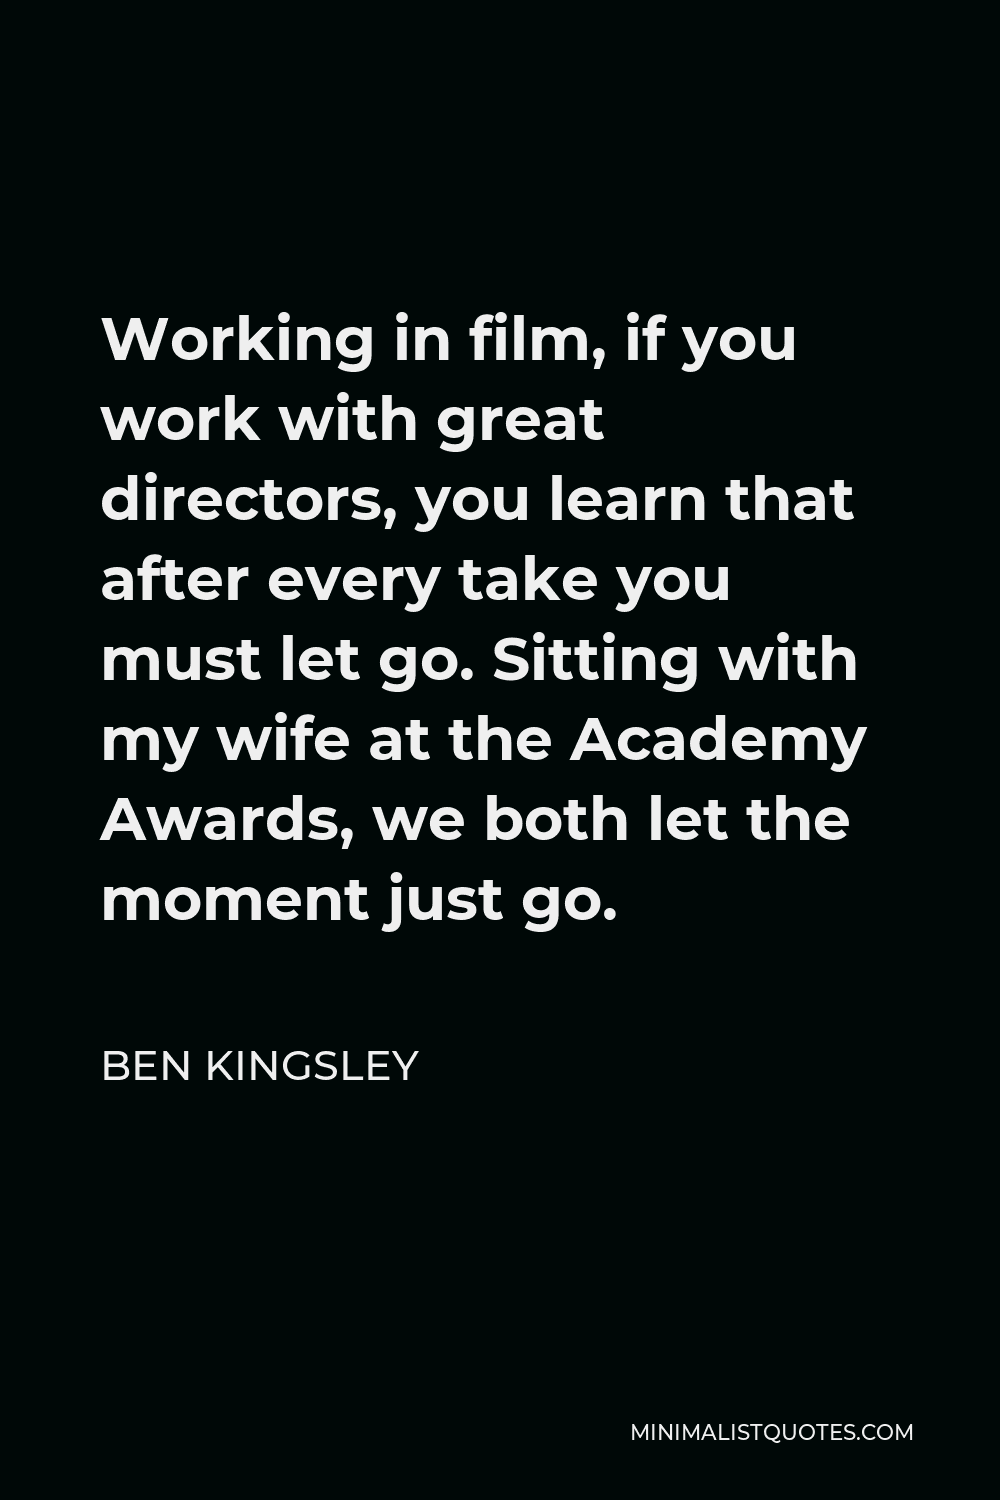 Ben Kingsley Quote - Working in film, if you work with great directors, you learn that after every take you must let go. Sitting with my wife at the Academy Awards, we both let the moment just go.